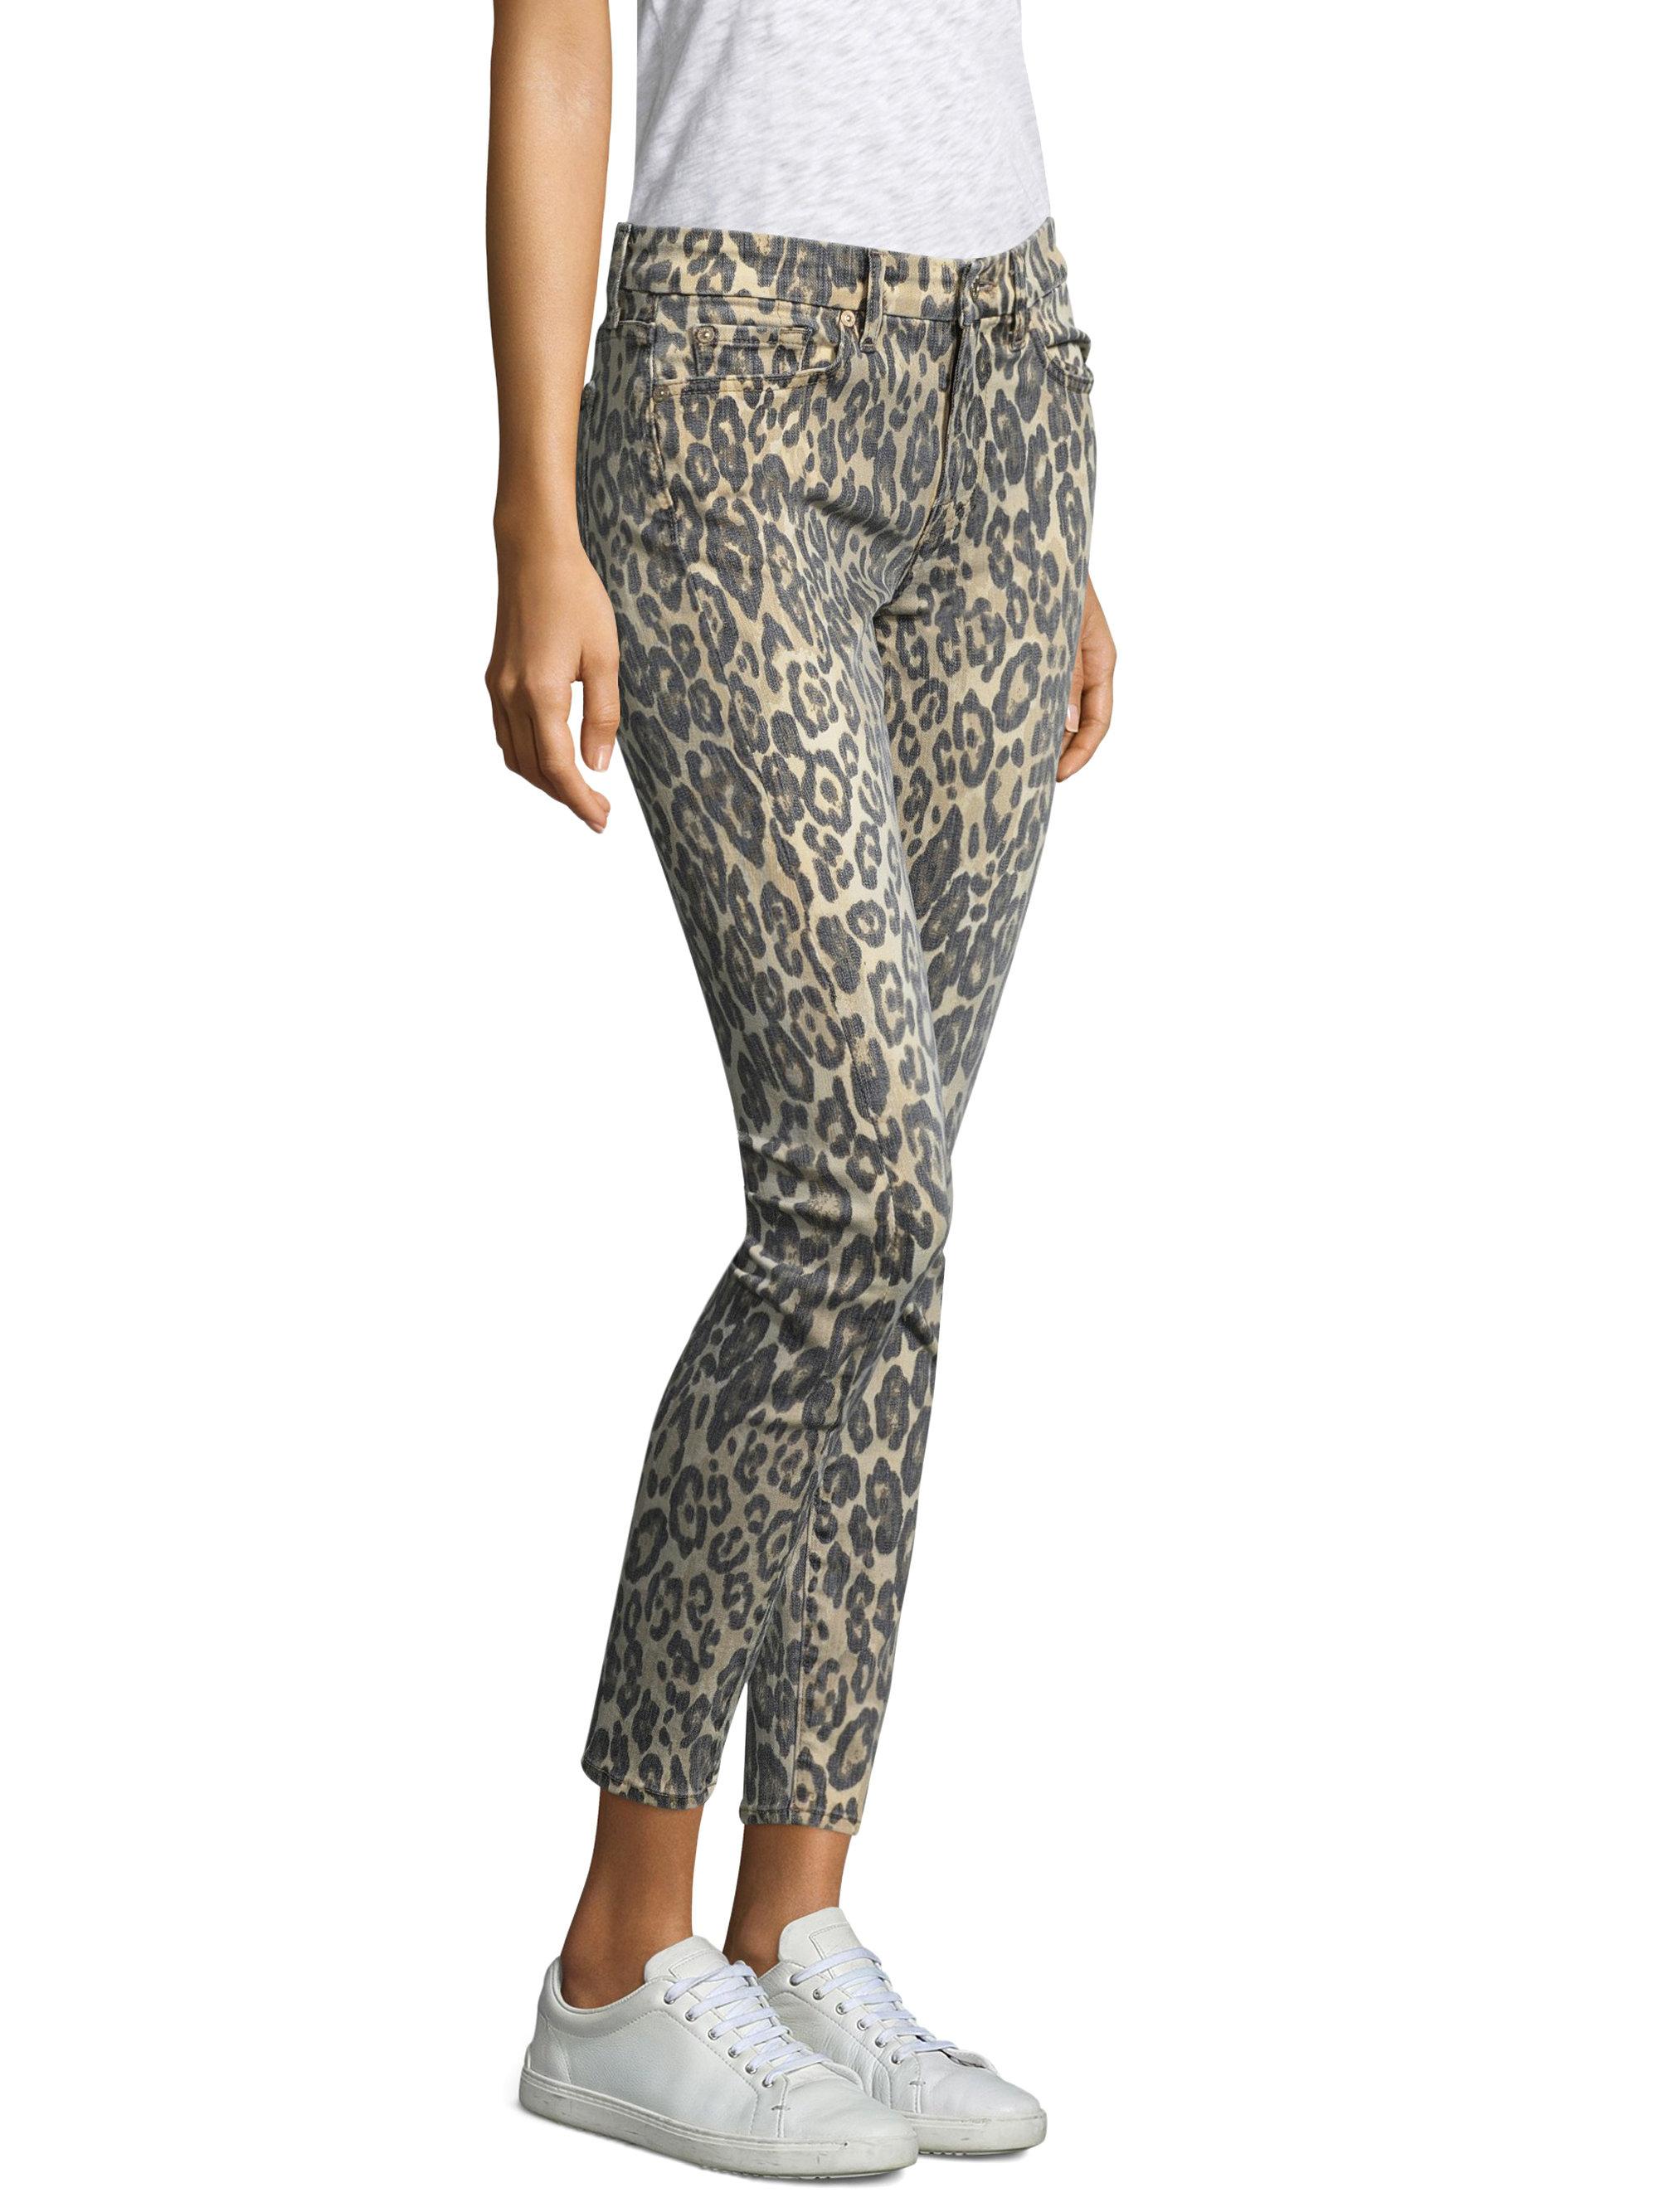 7 For All Mankind Denim Cheetah Print Jeans in Beige (Natural) | Lyst